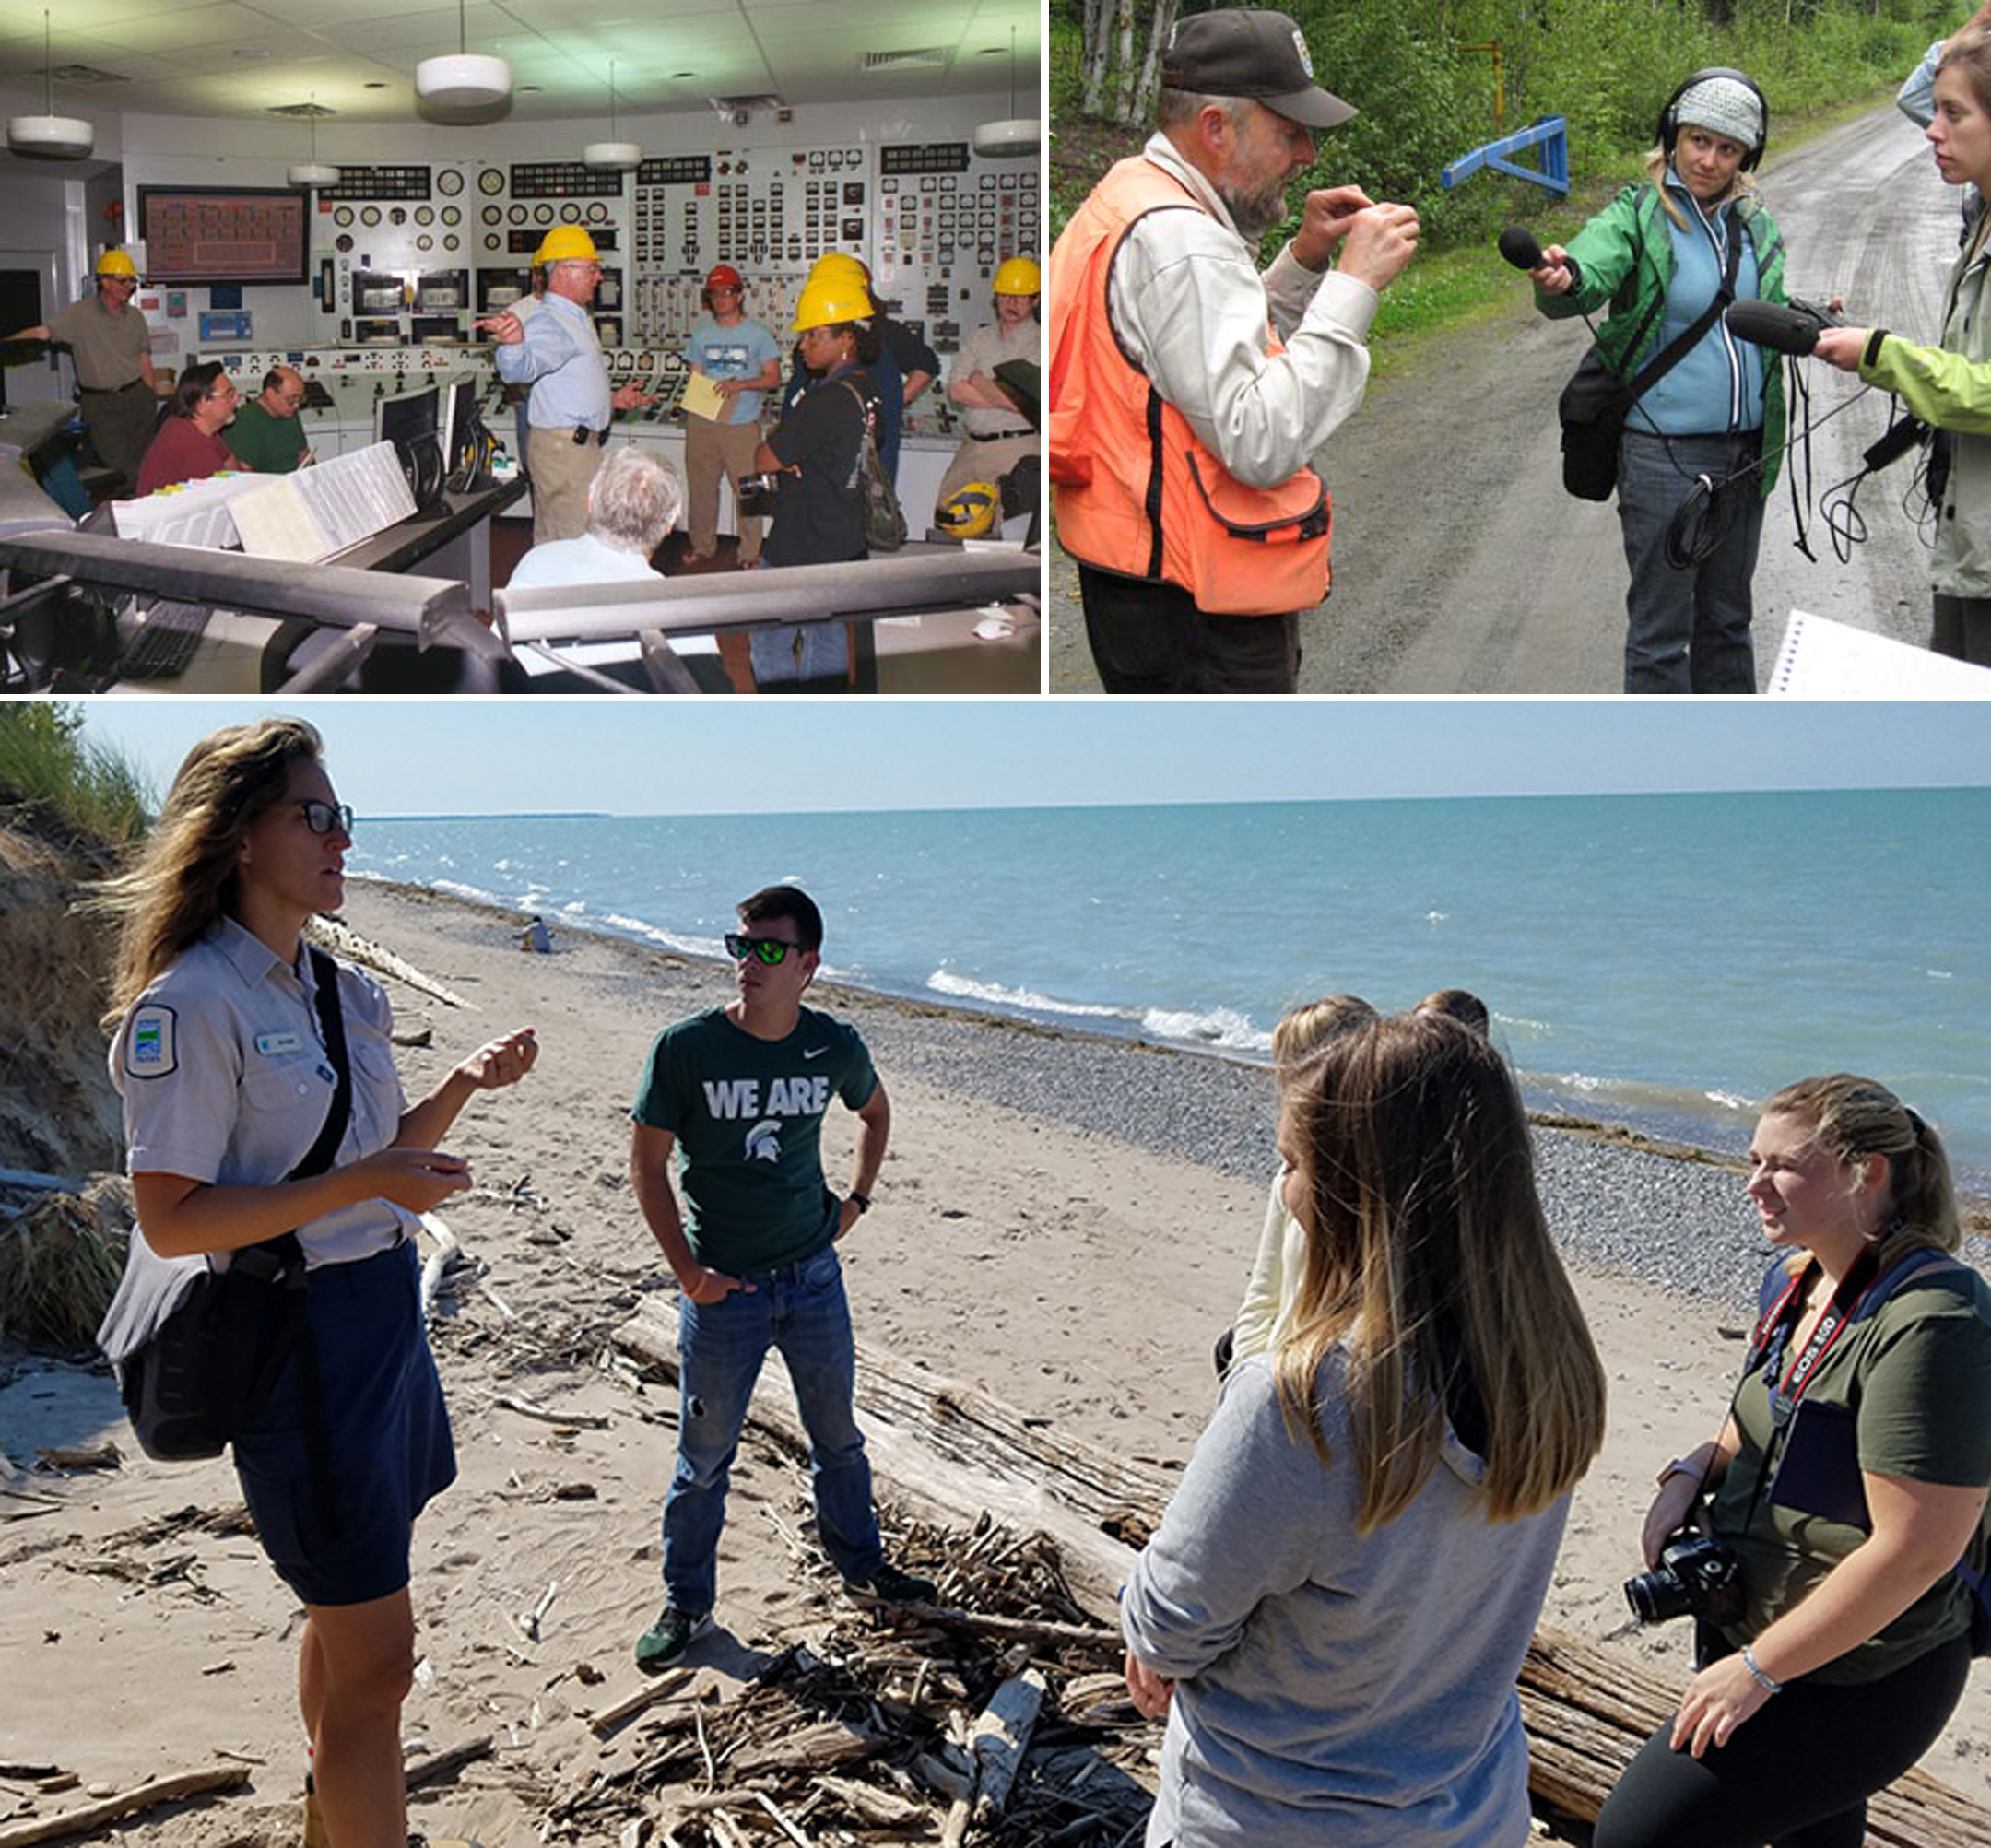 Grid of three images, two small on the top and a larger one below, showing student journalists at work at